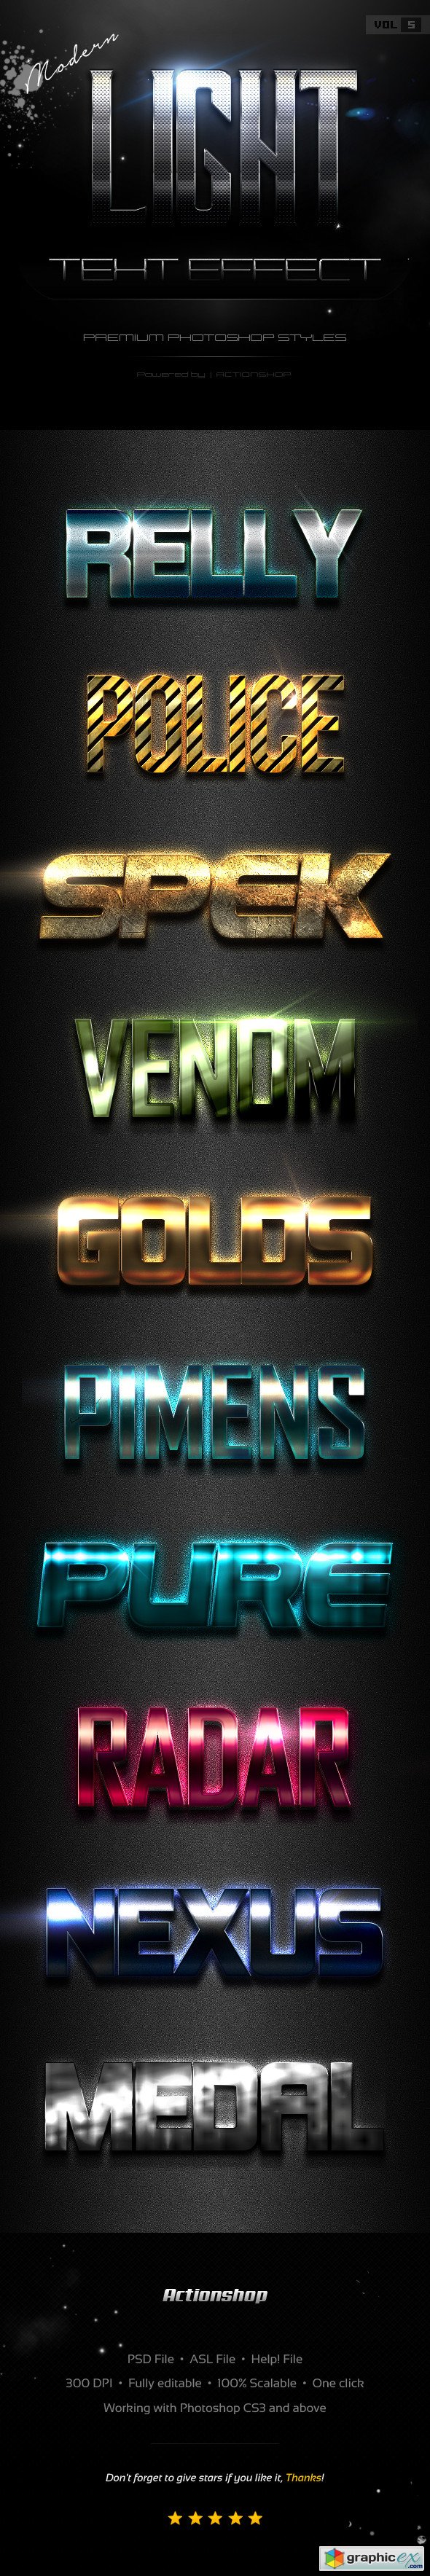 Graphicriver 10 Modern Light Text Effects Vol.5